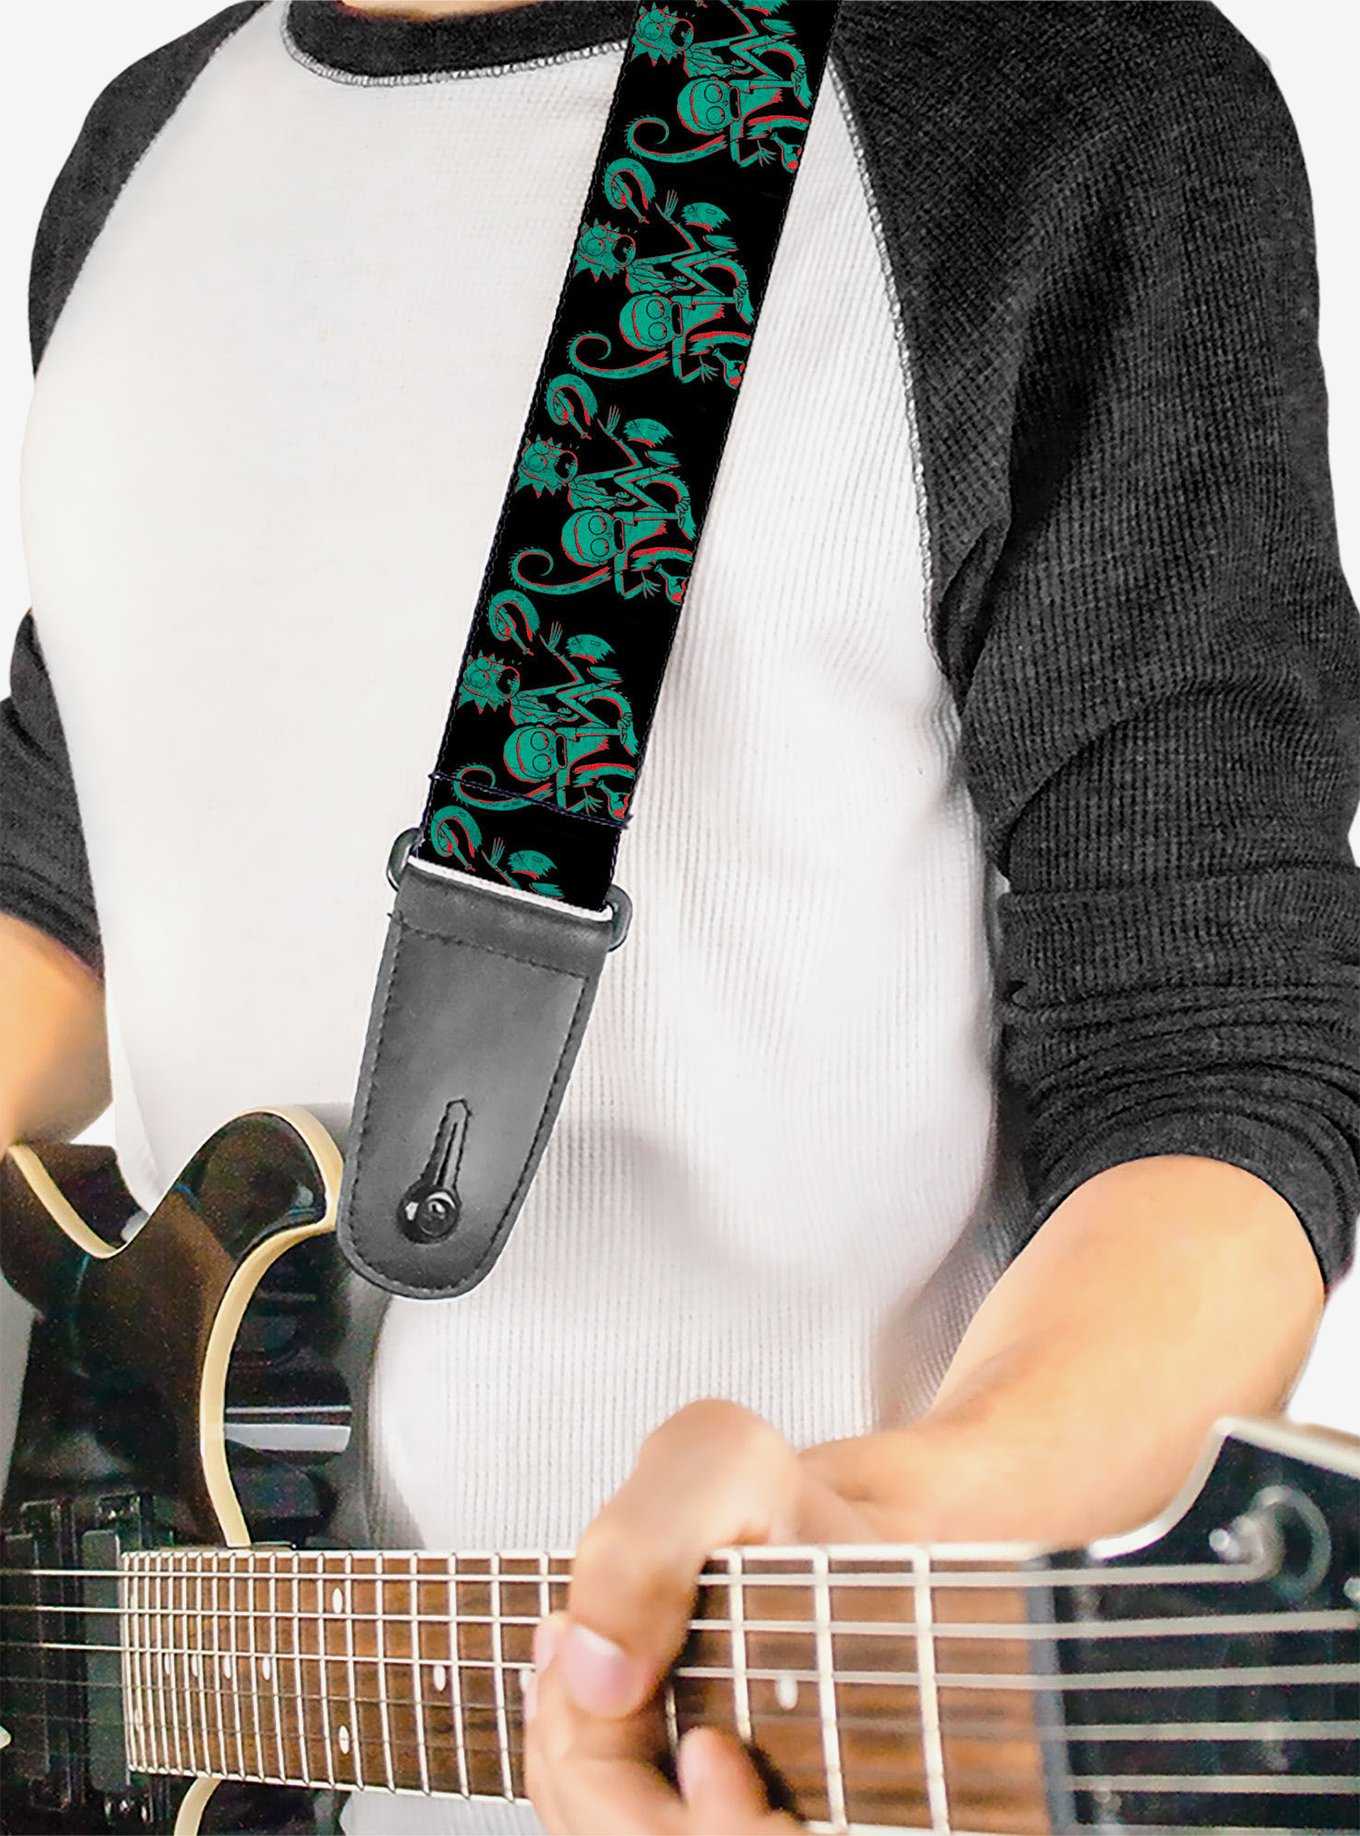 Rick and Morty Psychedelic Monster Pose Guitar Strap, , hi-res